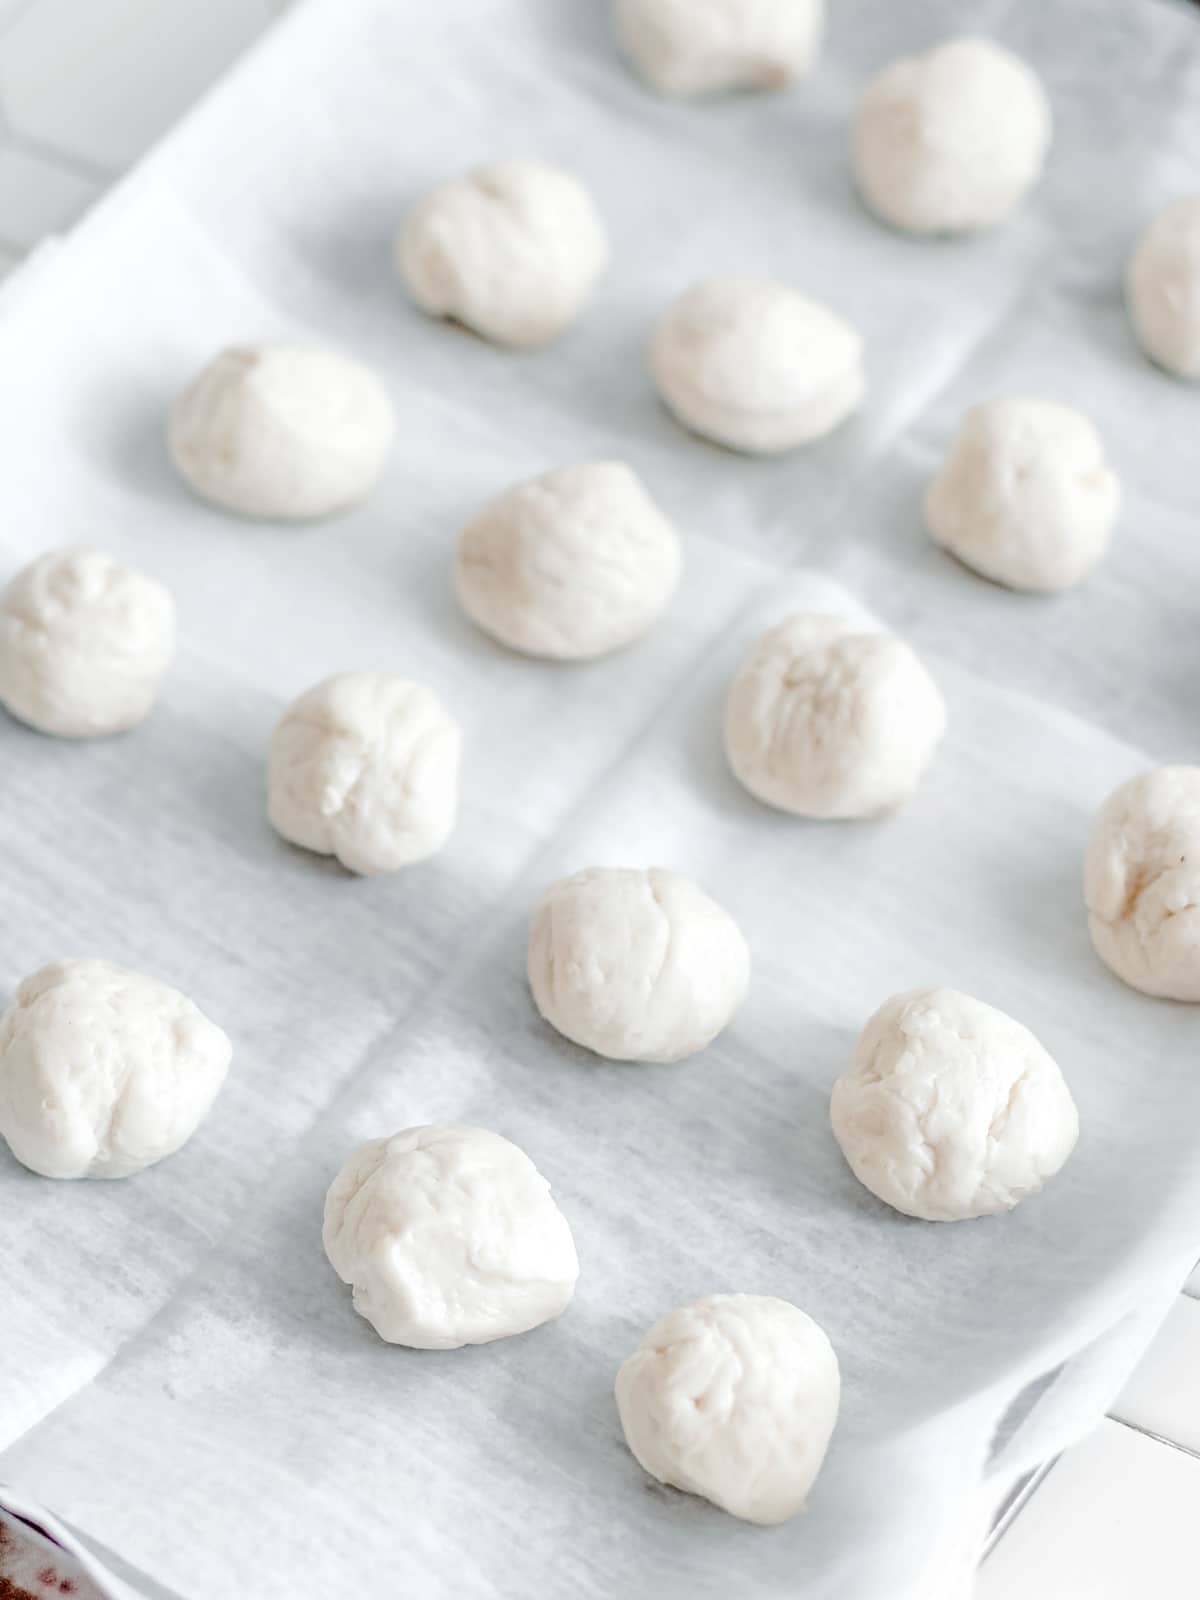 Biscuit pieces rolled into balls and placed on parchment paper.